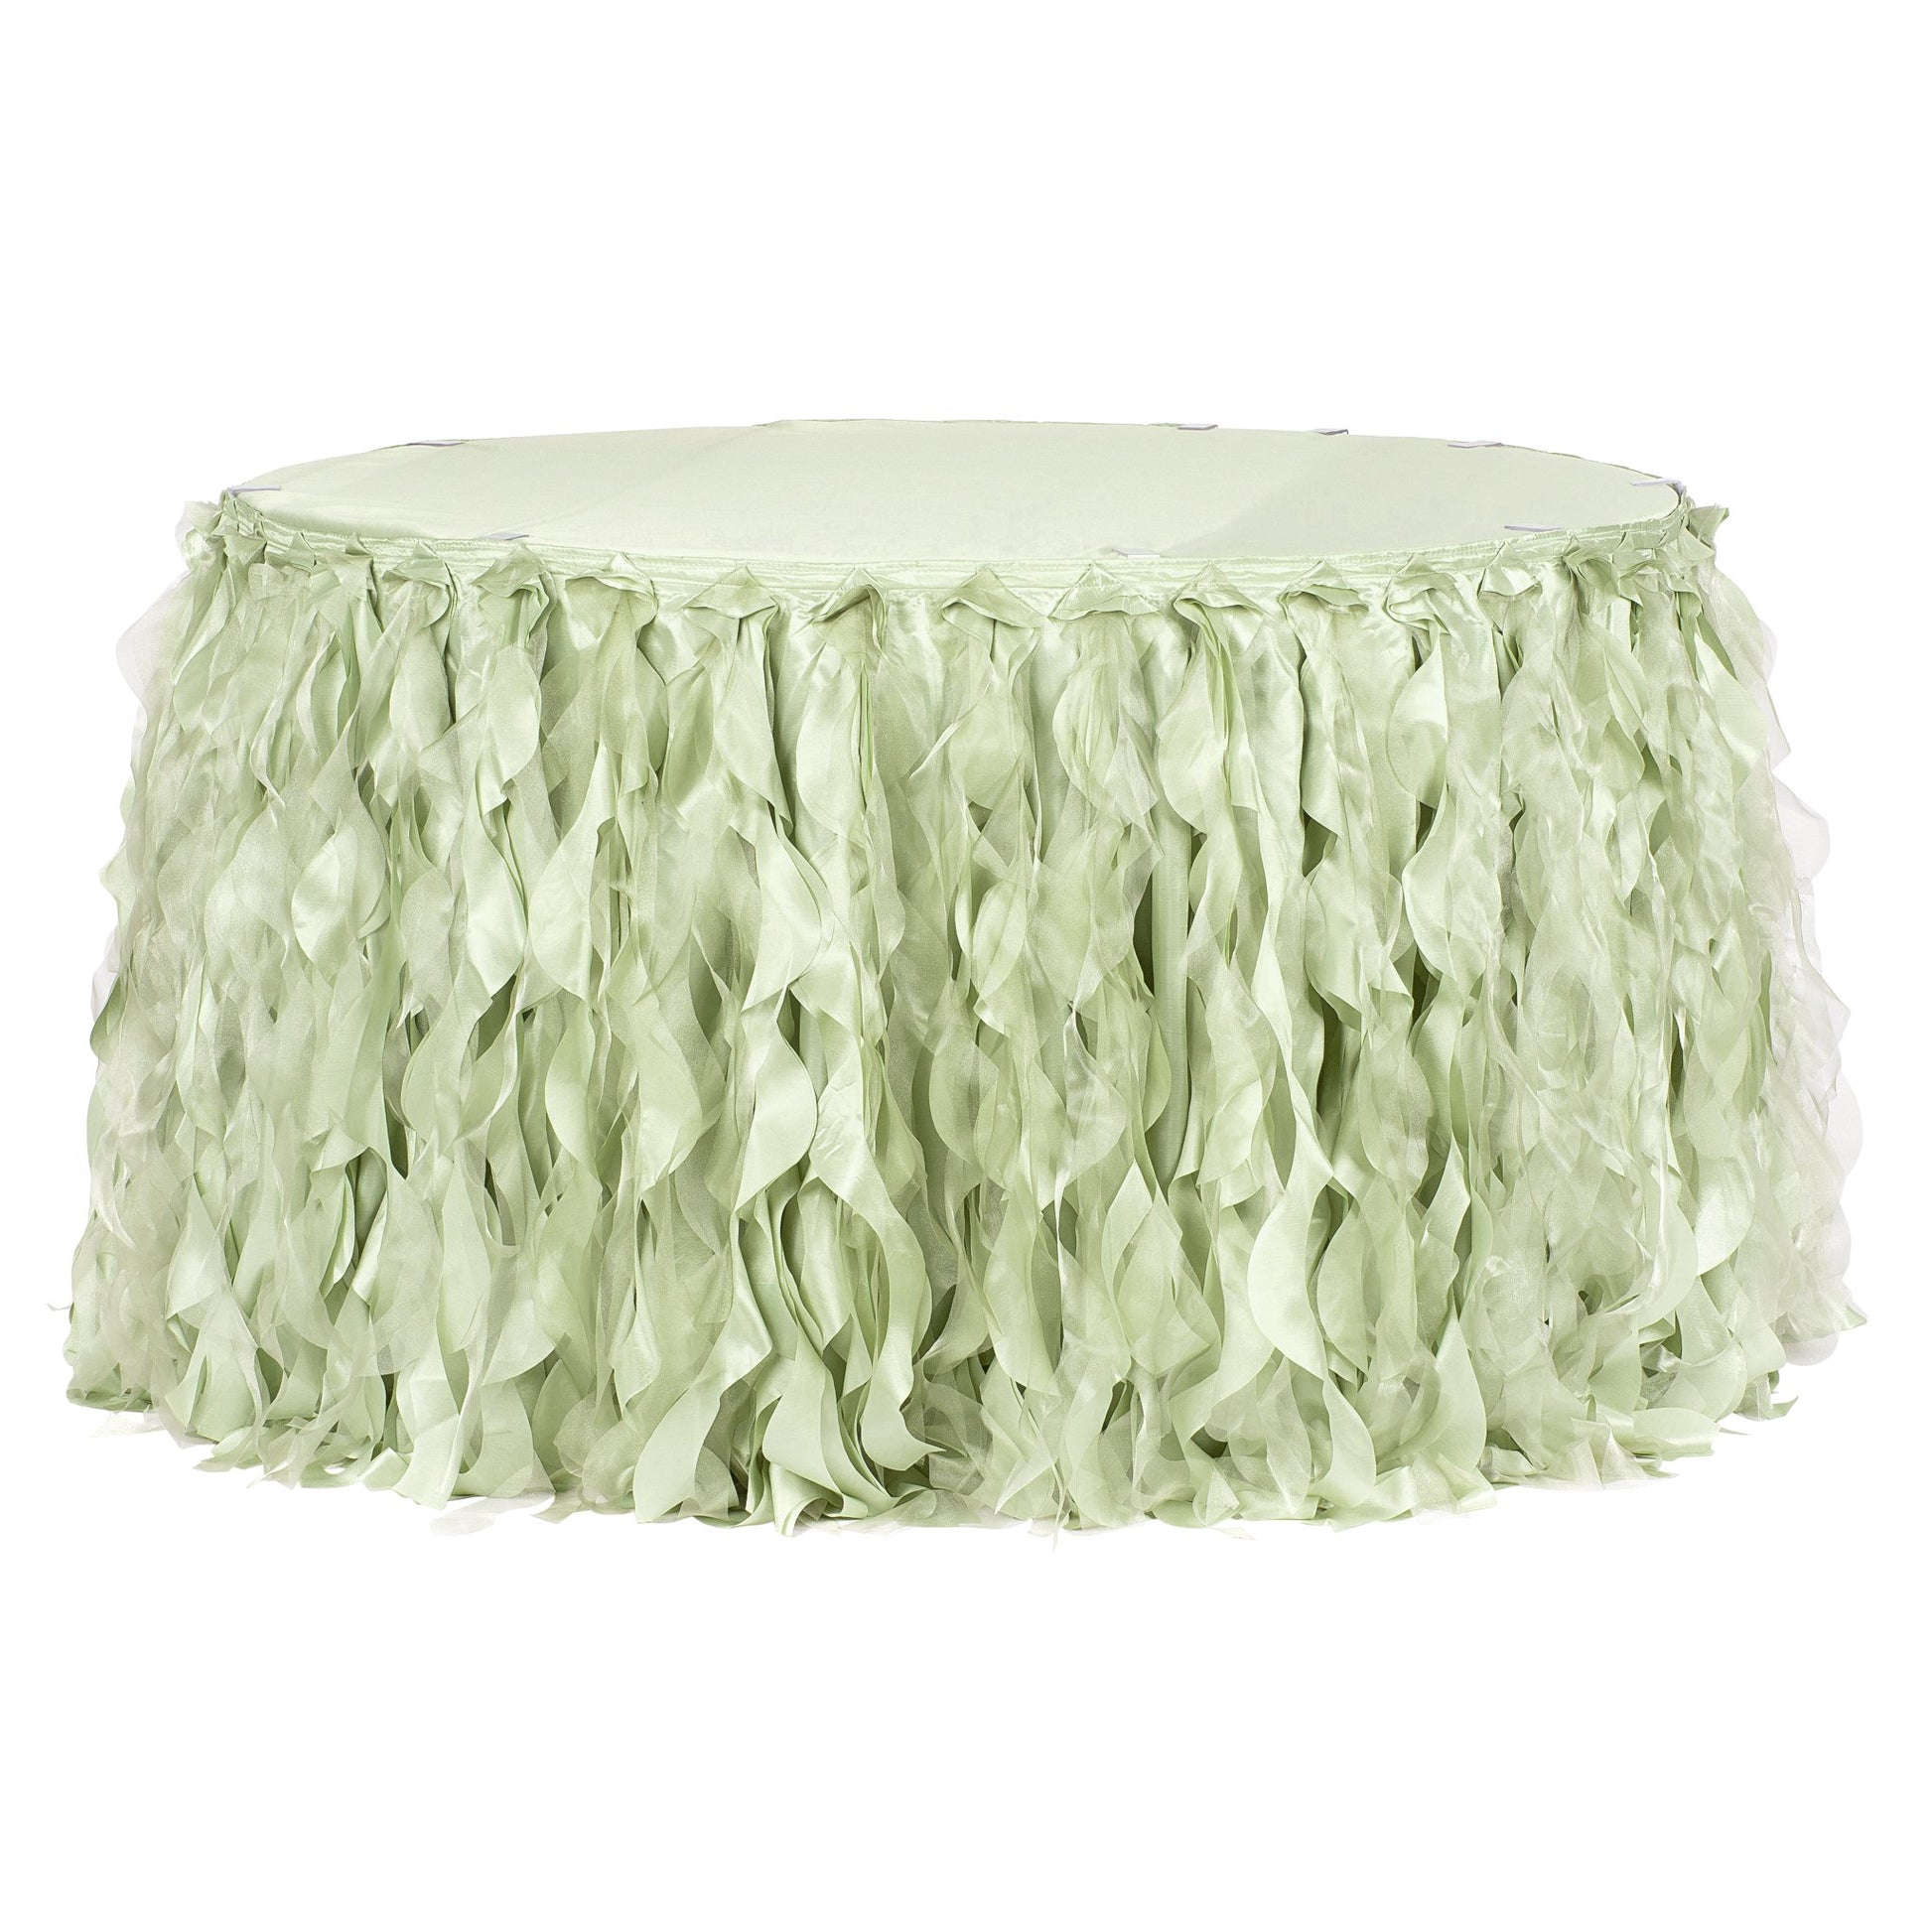 Curly Willow 14ft Table Skirt - Sage Green - CV Linens